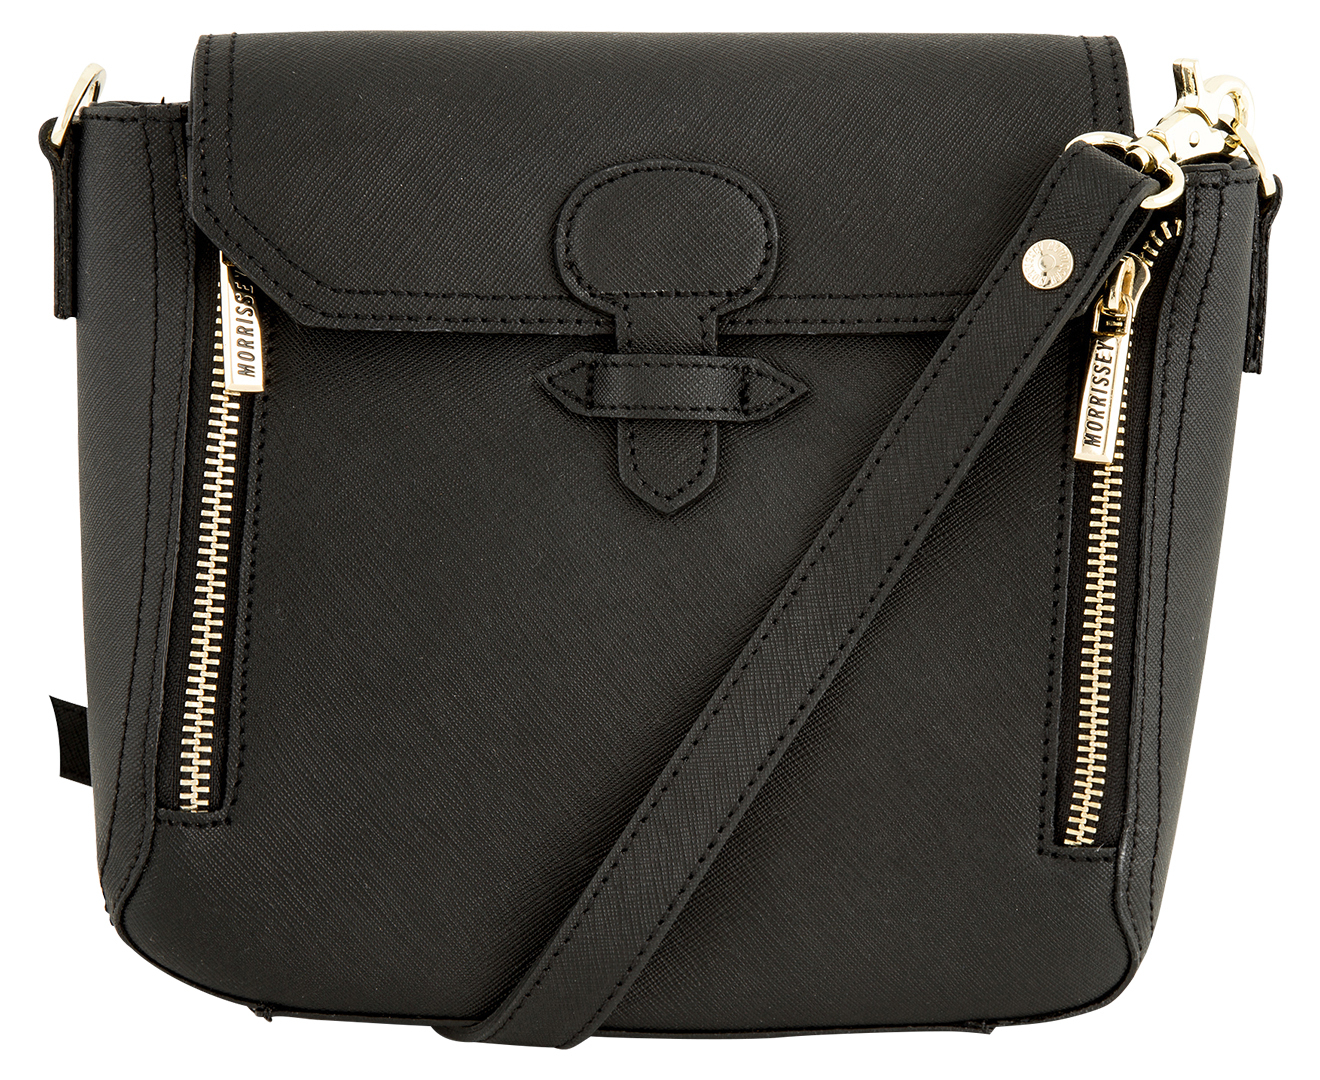 Morrissey Saffiano Structured Leather Crossbody Bag - Black | Catch.co.nz